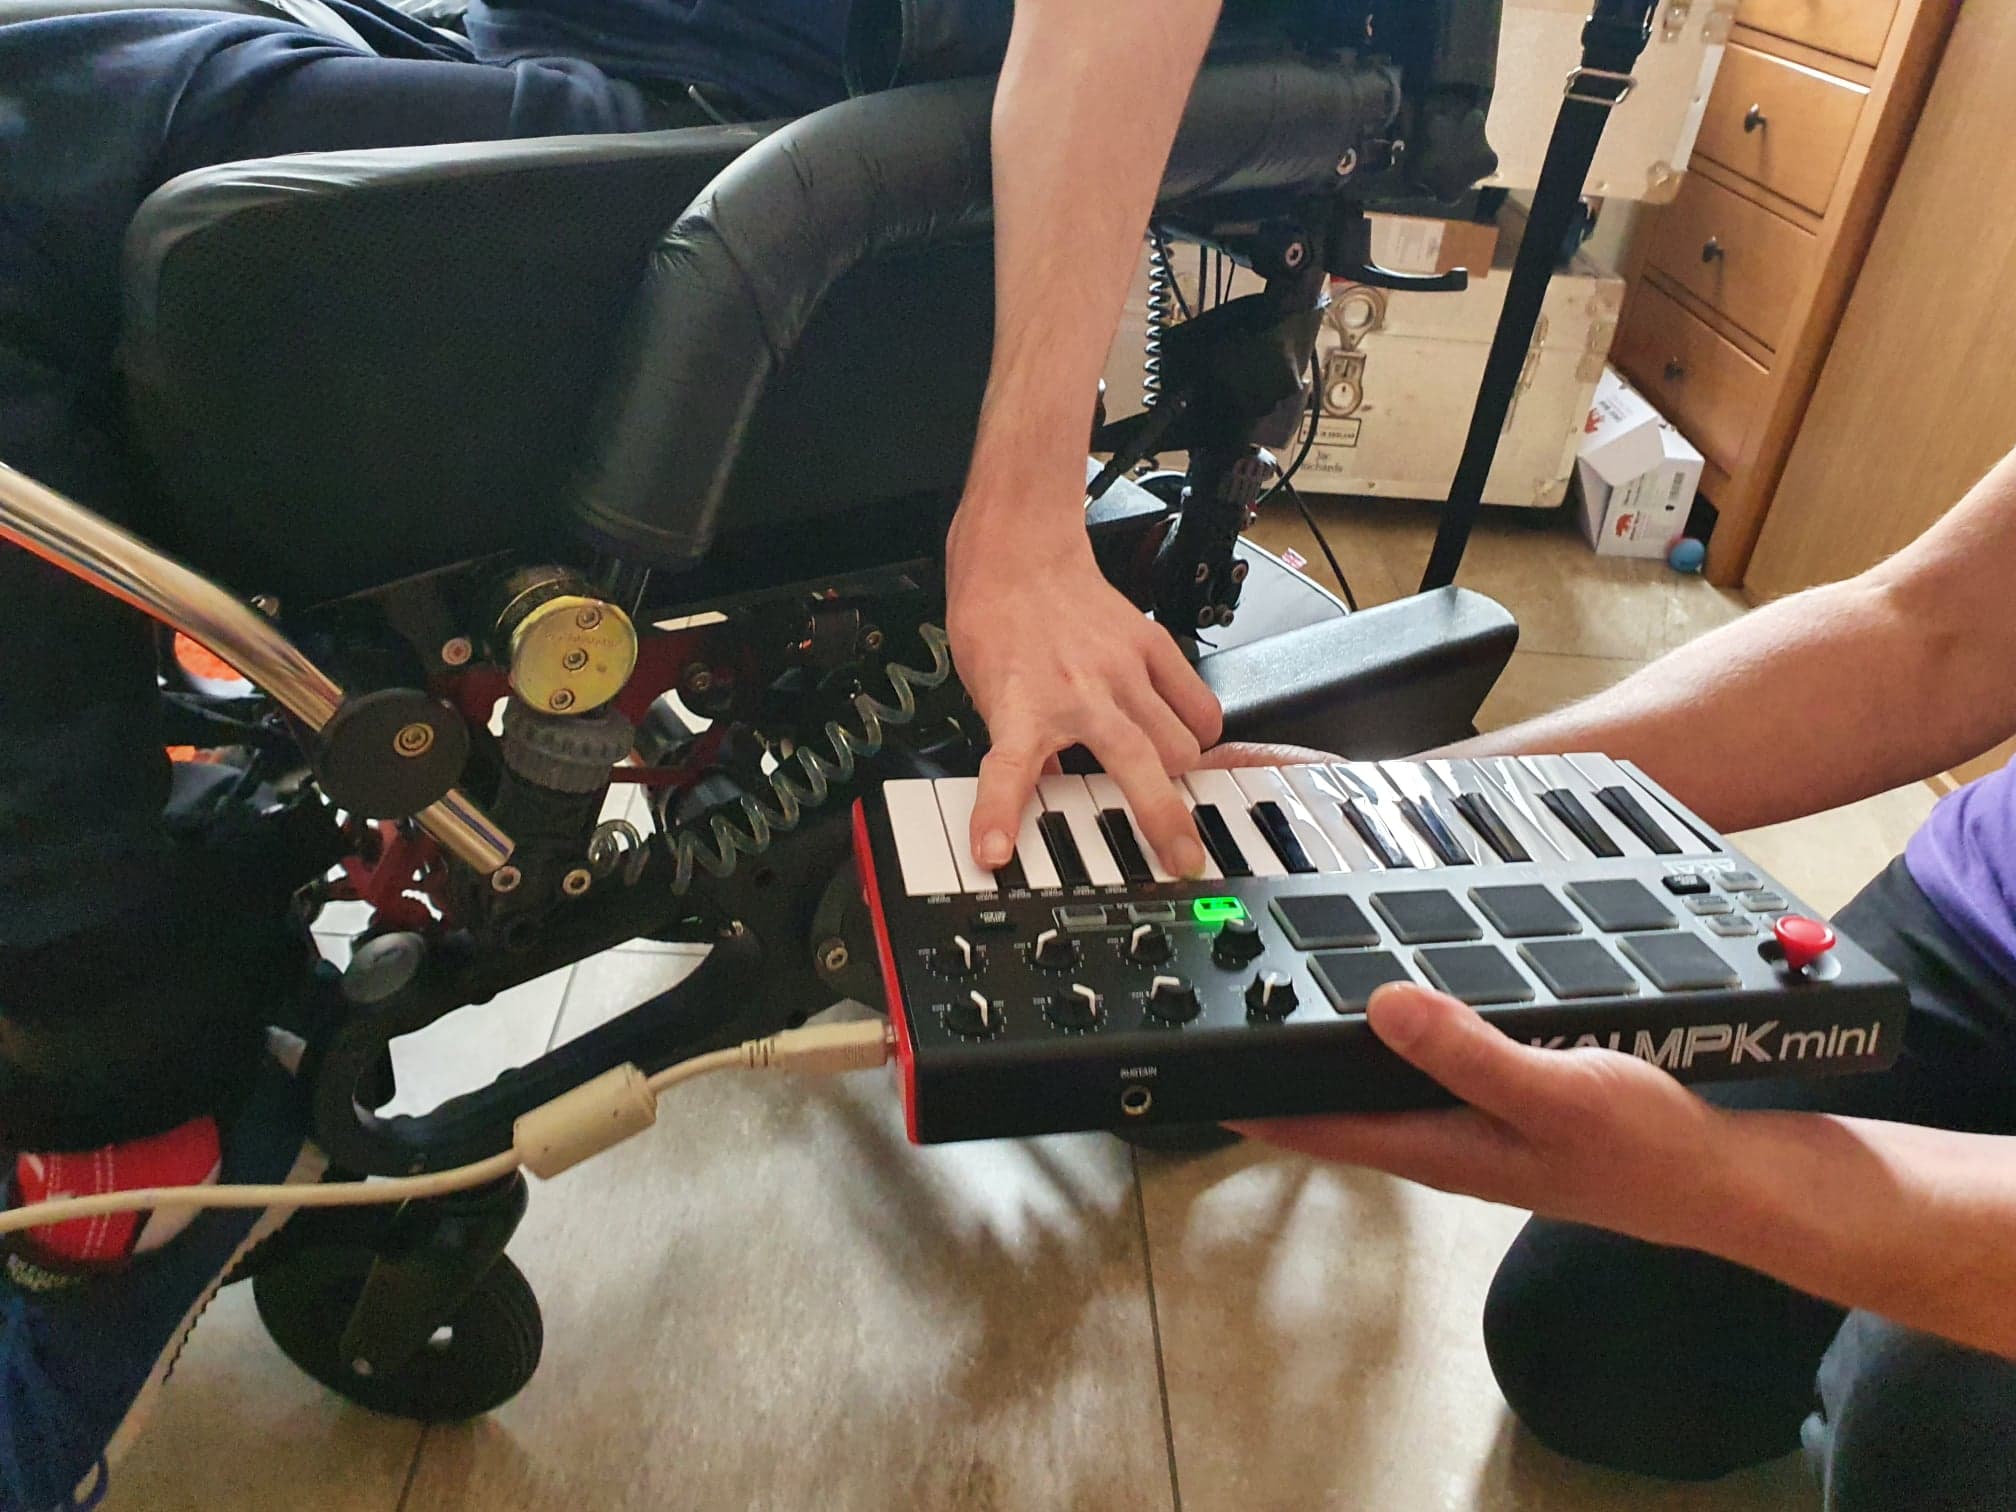 Outreach Music Studio - keyboard midi controller being played by disabled musician.